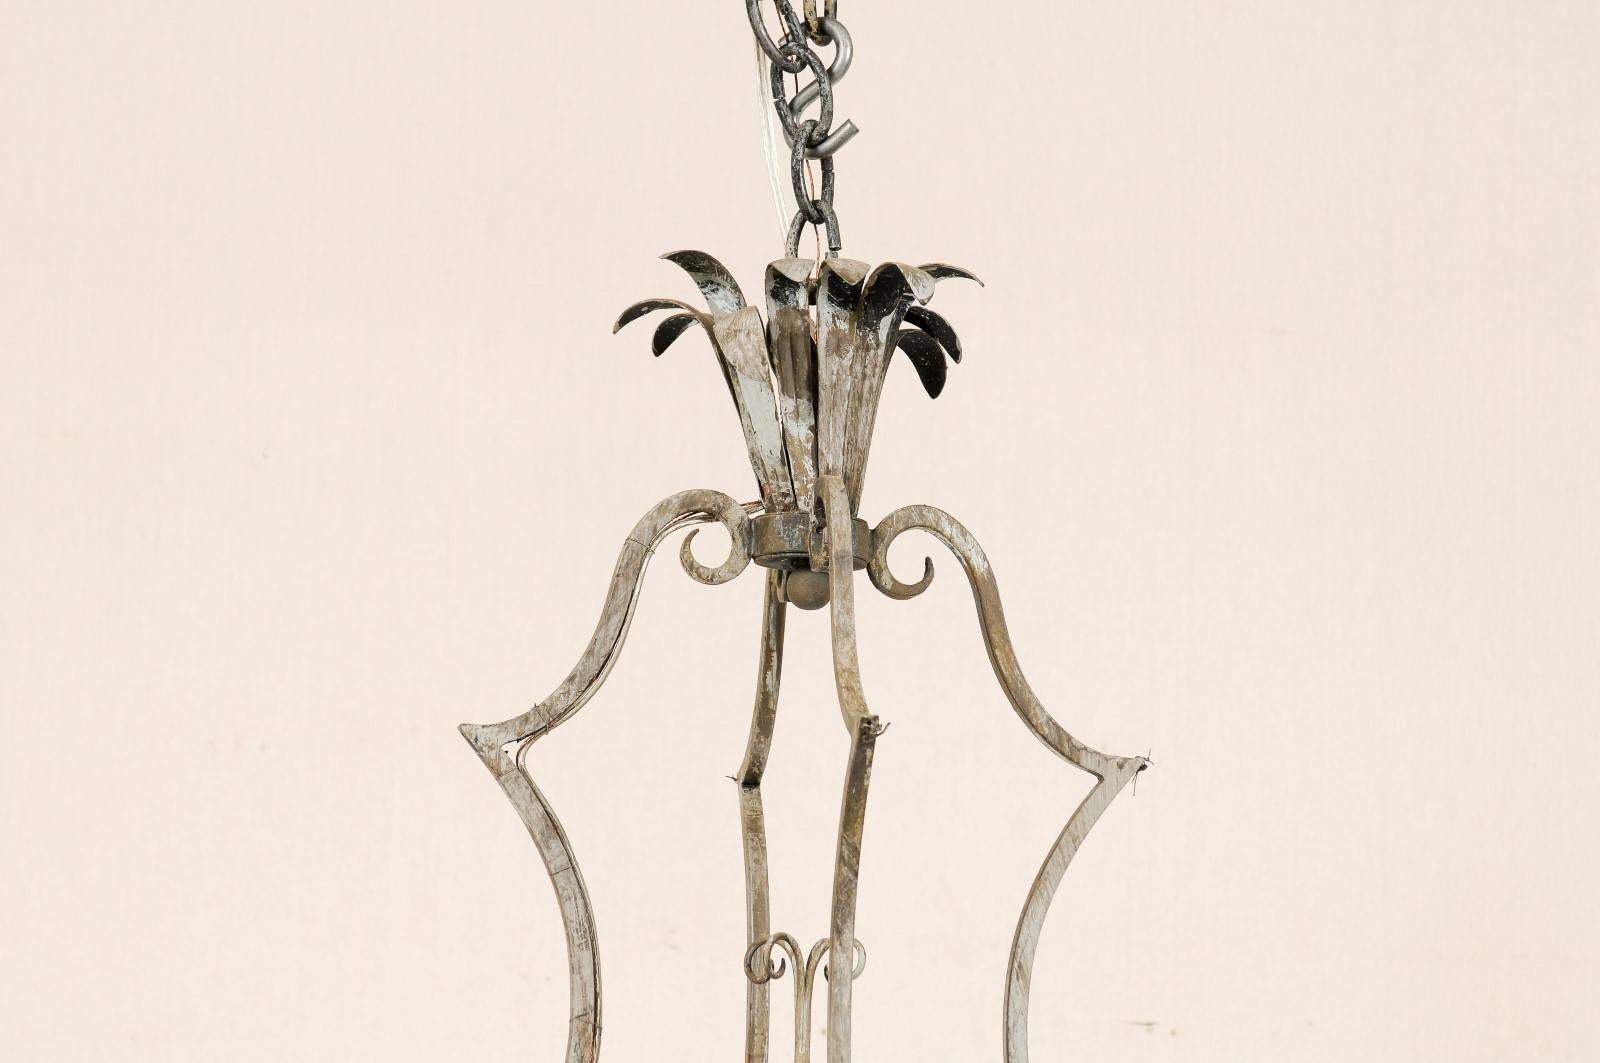 20th Century French Painted 8-Light Forged-Iron Chandelier Adorn w/ Acanthus Leaves & Scrolls